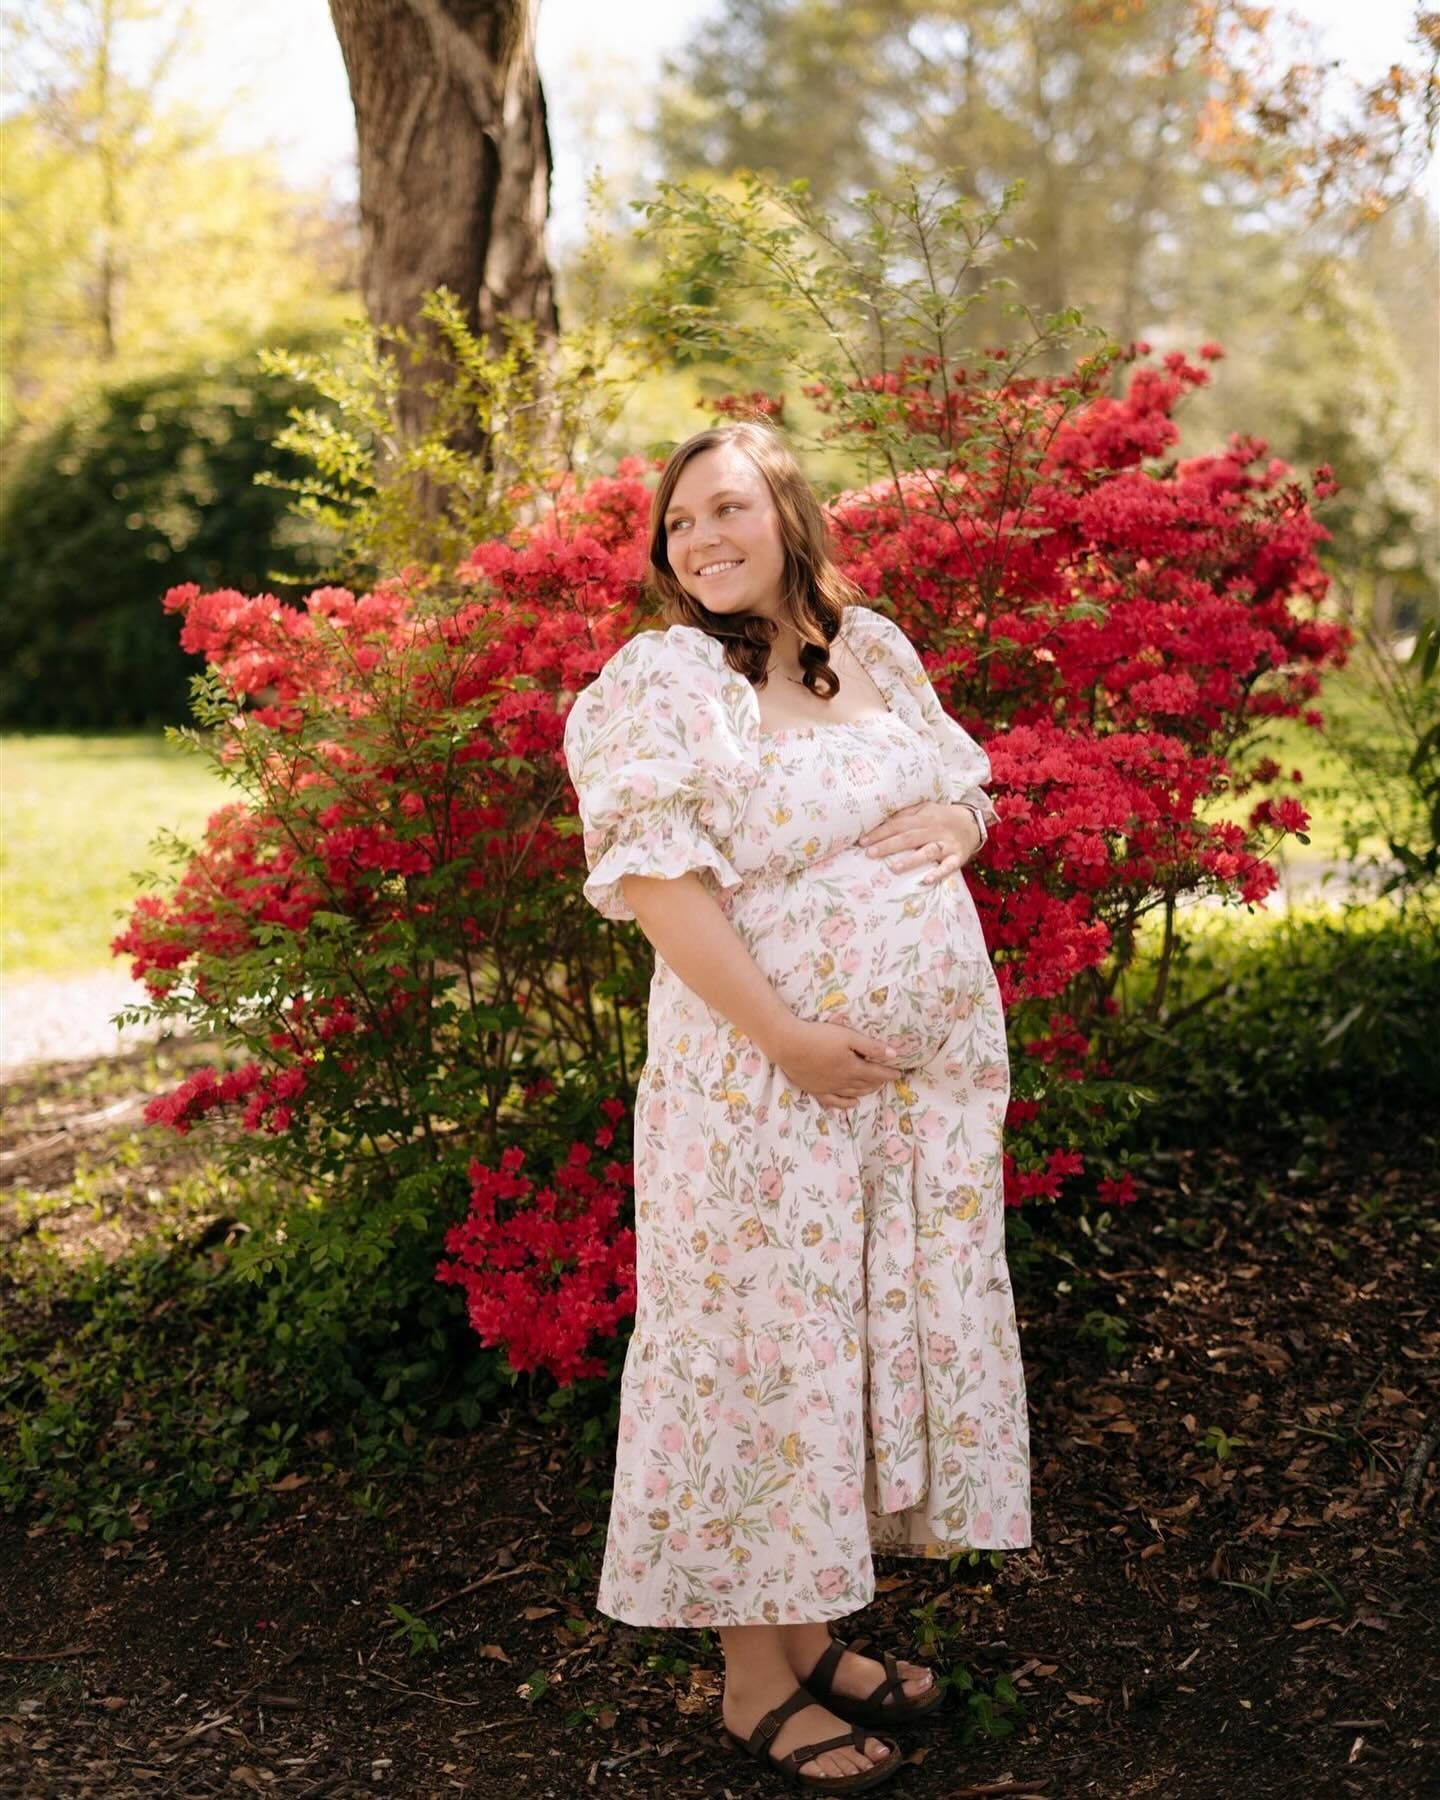 the sweetest maternity photos of this mama. 🌸🫶🏼

I absolutely love this job and truly cherish each and every minute spent with a client.